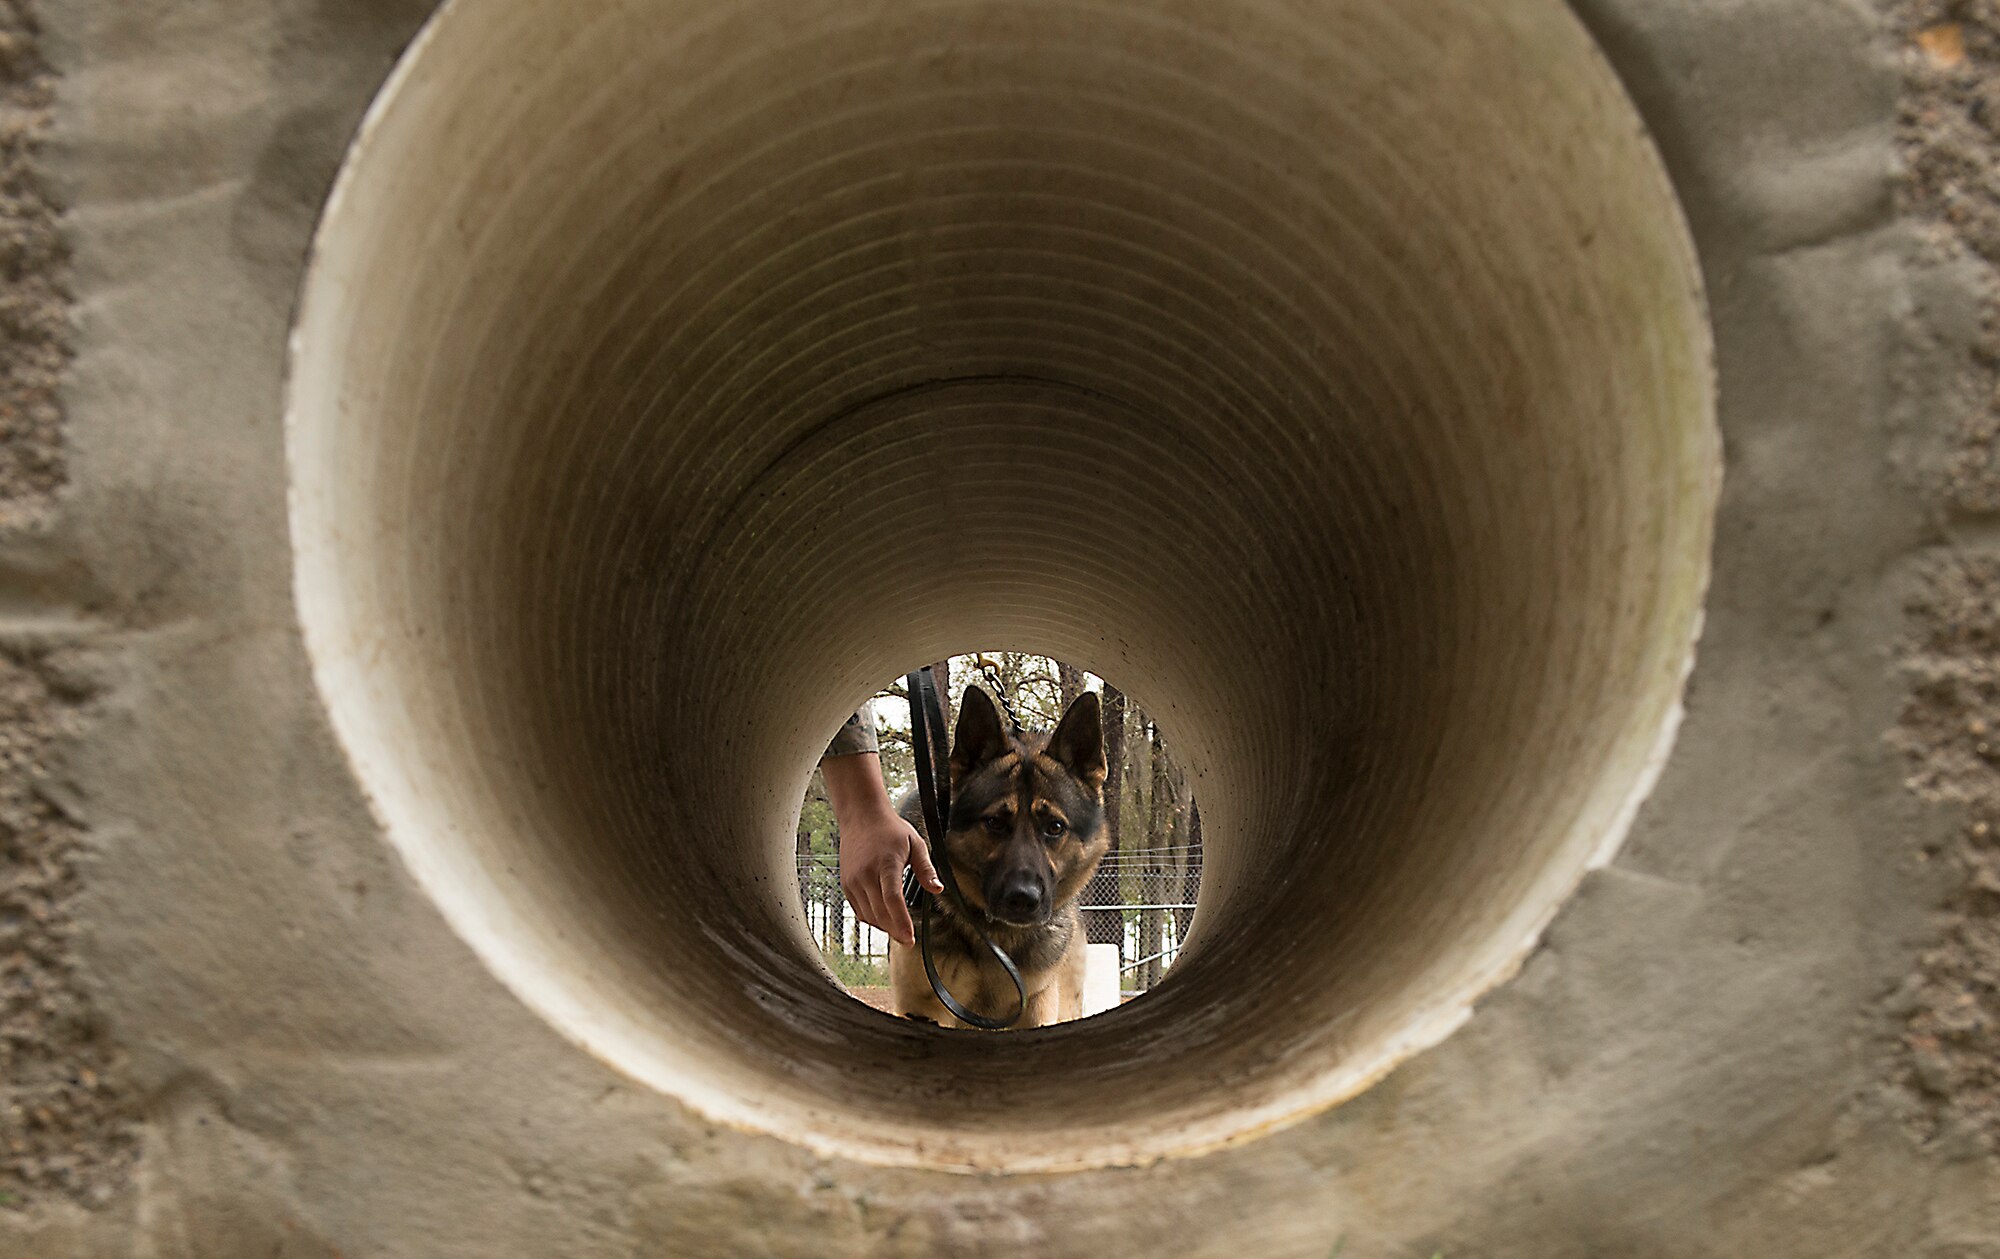 Military Working Dog Marco, 23d Security Forces Squadron, awaits his handler’s command to go through a tunnel during training at Moody Air Force Base, Ga., March 7, 2014. Marco and MWD Nido, the kennel’s newest arrivals, are both patrol and explosive detection dogs. (U.S. Air Force photo by Senior Airman Tiffany M. Grigg/Released)